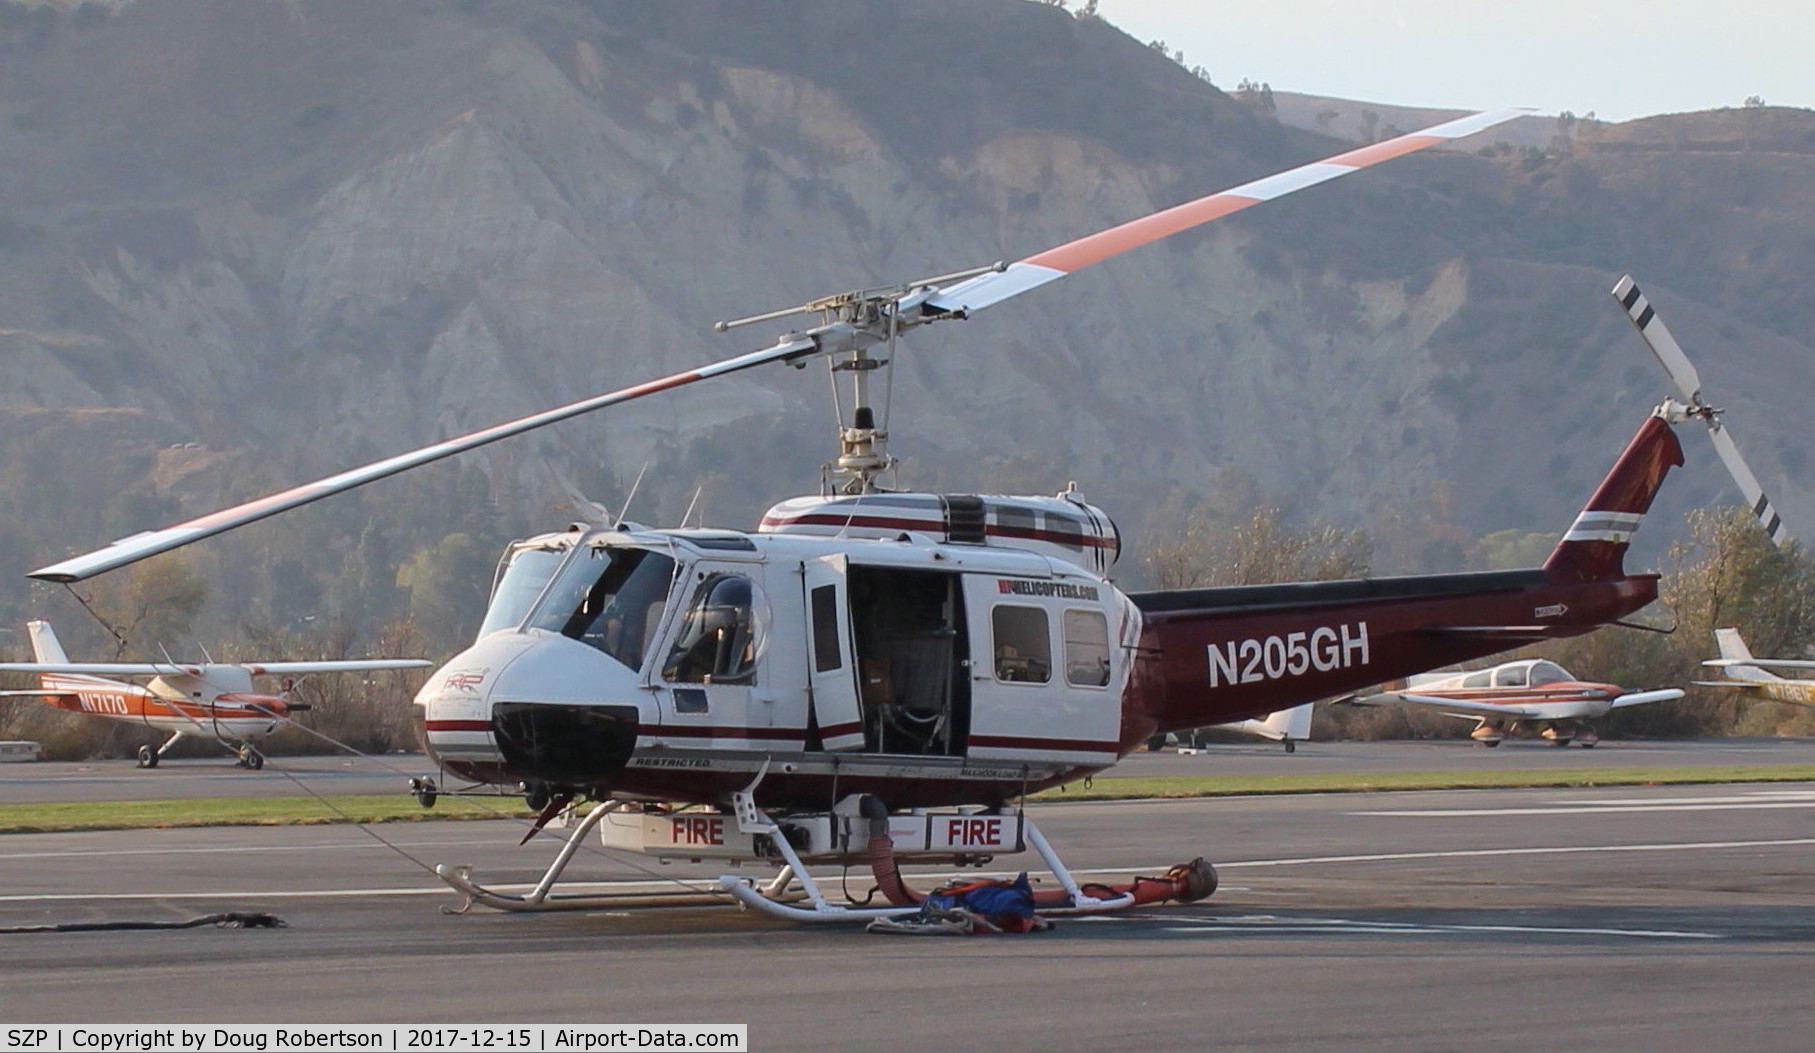 Santa Paula Airport (SZP) - N205GH, 1965 Bell UH-1H IROQUOIS, Lycoming T53L-703 Turboshaft, Restricted class, at the Thomas Fire Base